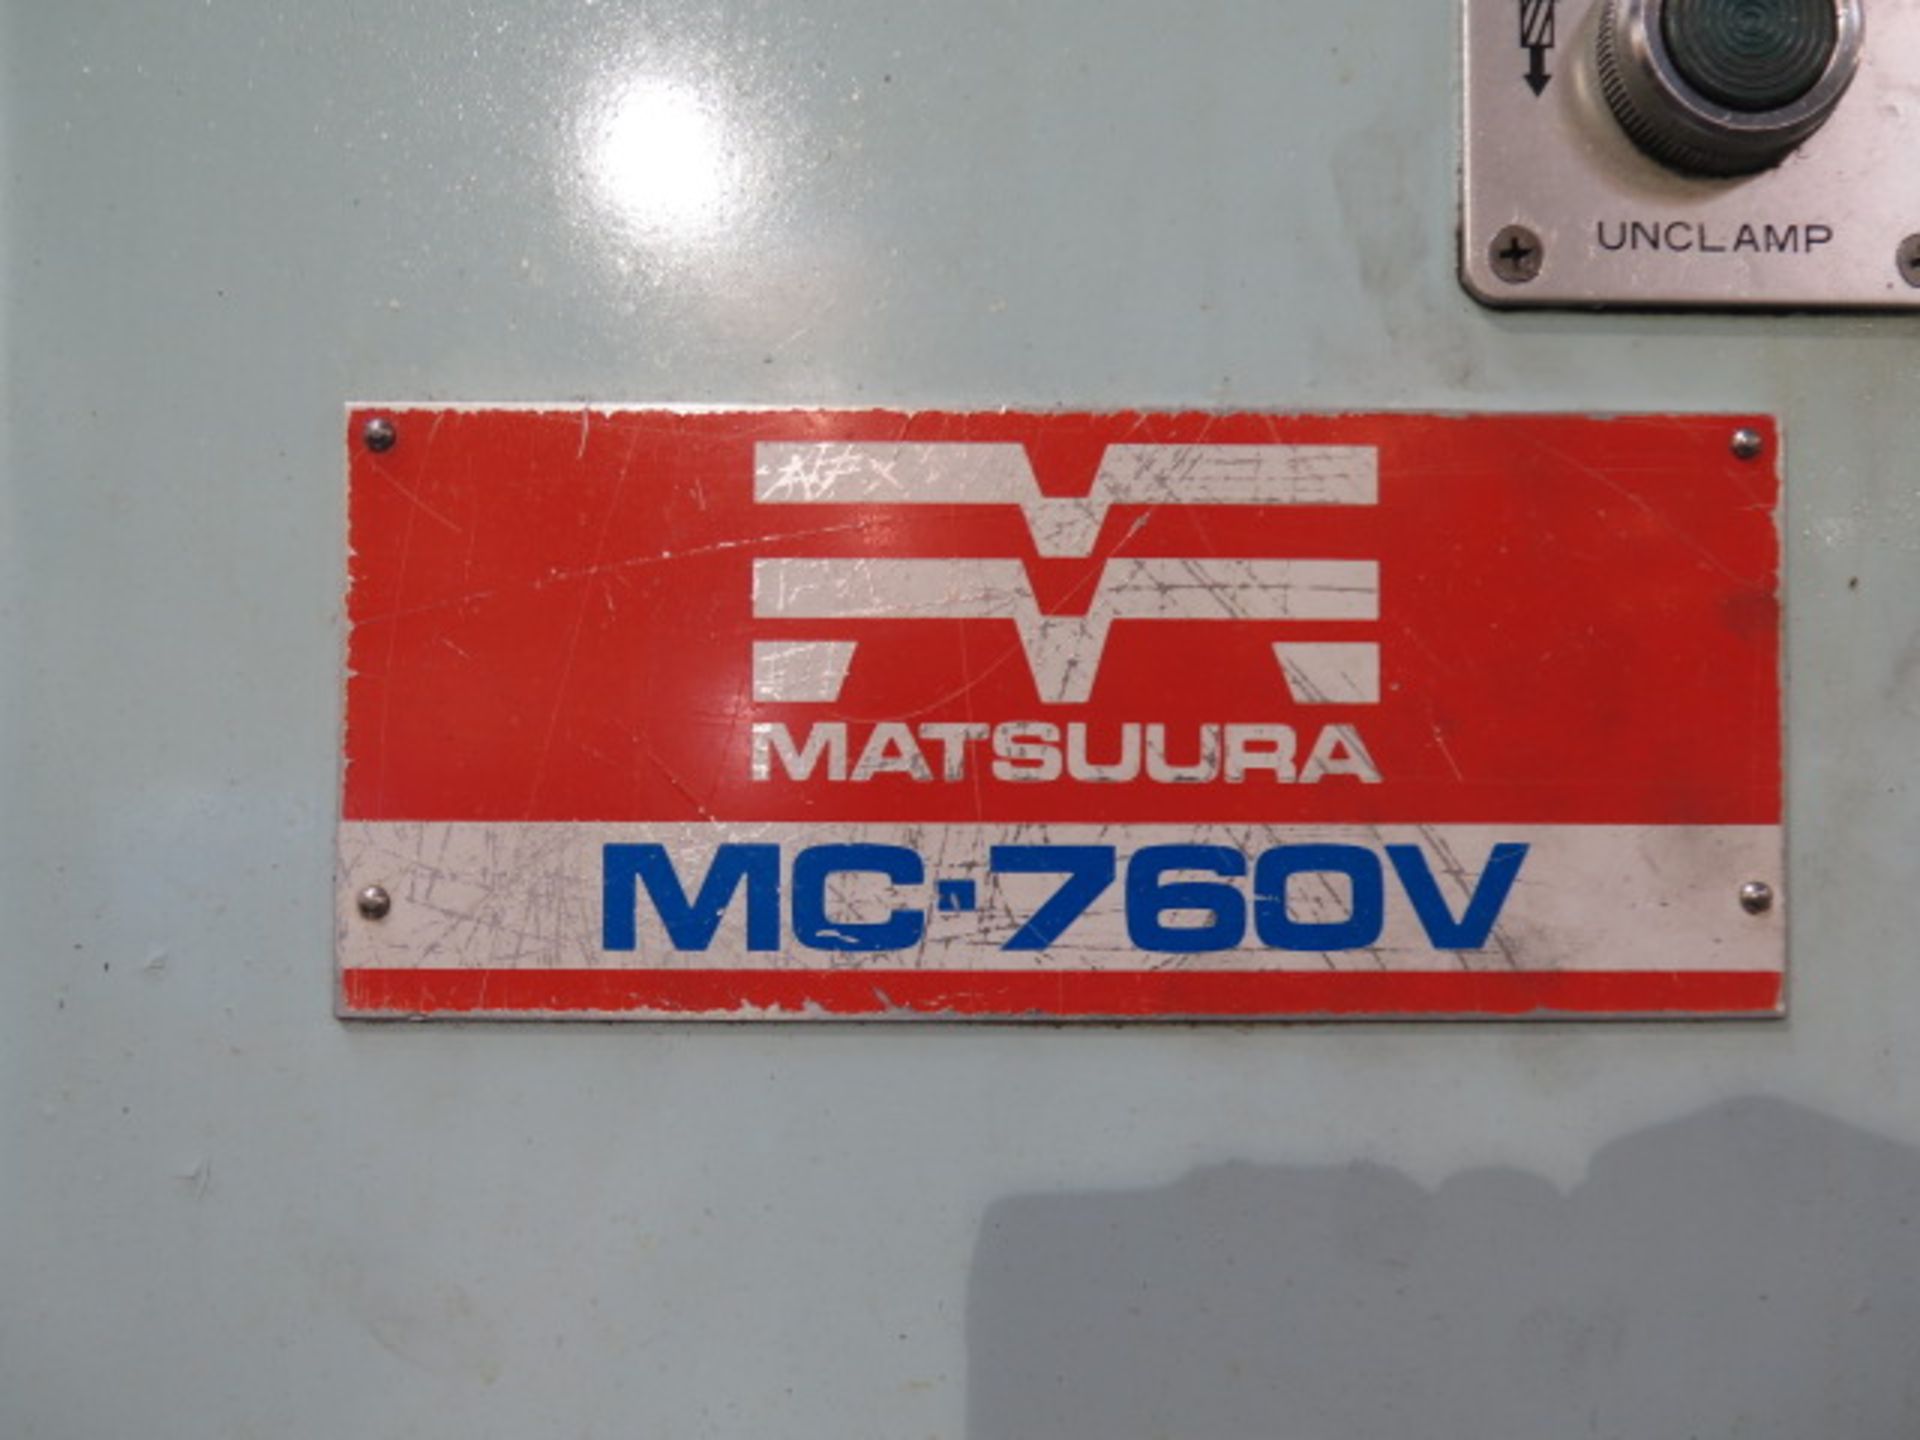 Matsuura MC-760V2 4-Axis CNC VMC s/n 85044778 w/ Yasnac MX2 Controls, SOLD AS IS - Image 8 of 9